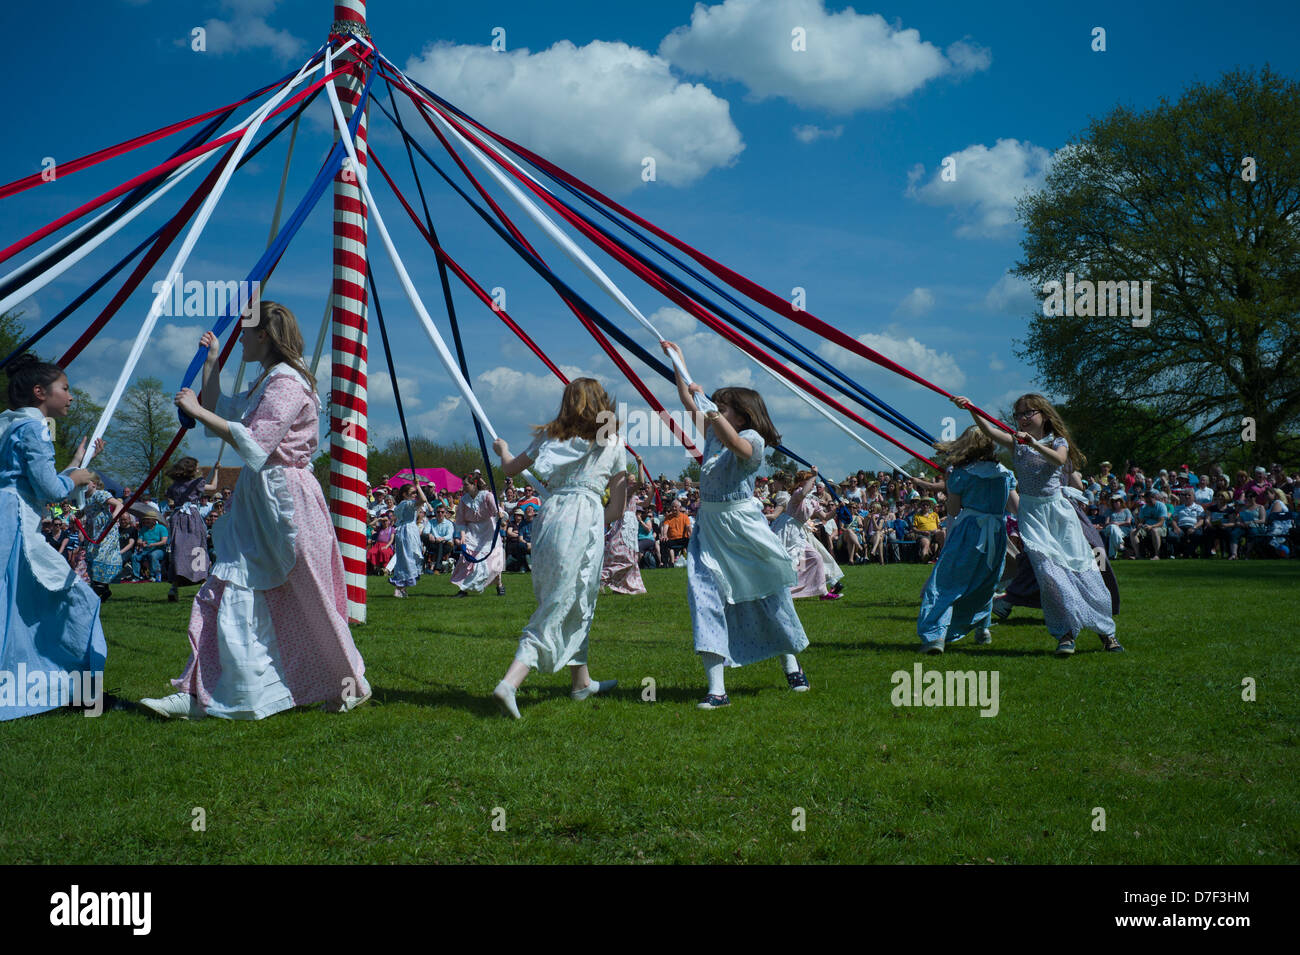 May Pole Dancing, Ickwell, Bedfordshire,England,May 2013. Children dancing around the Maypole on the village green at Ickwell. Stock Photo